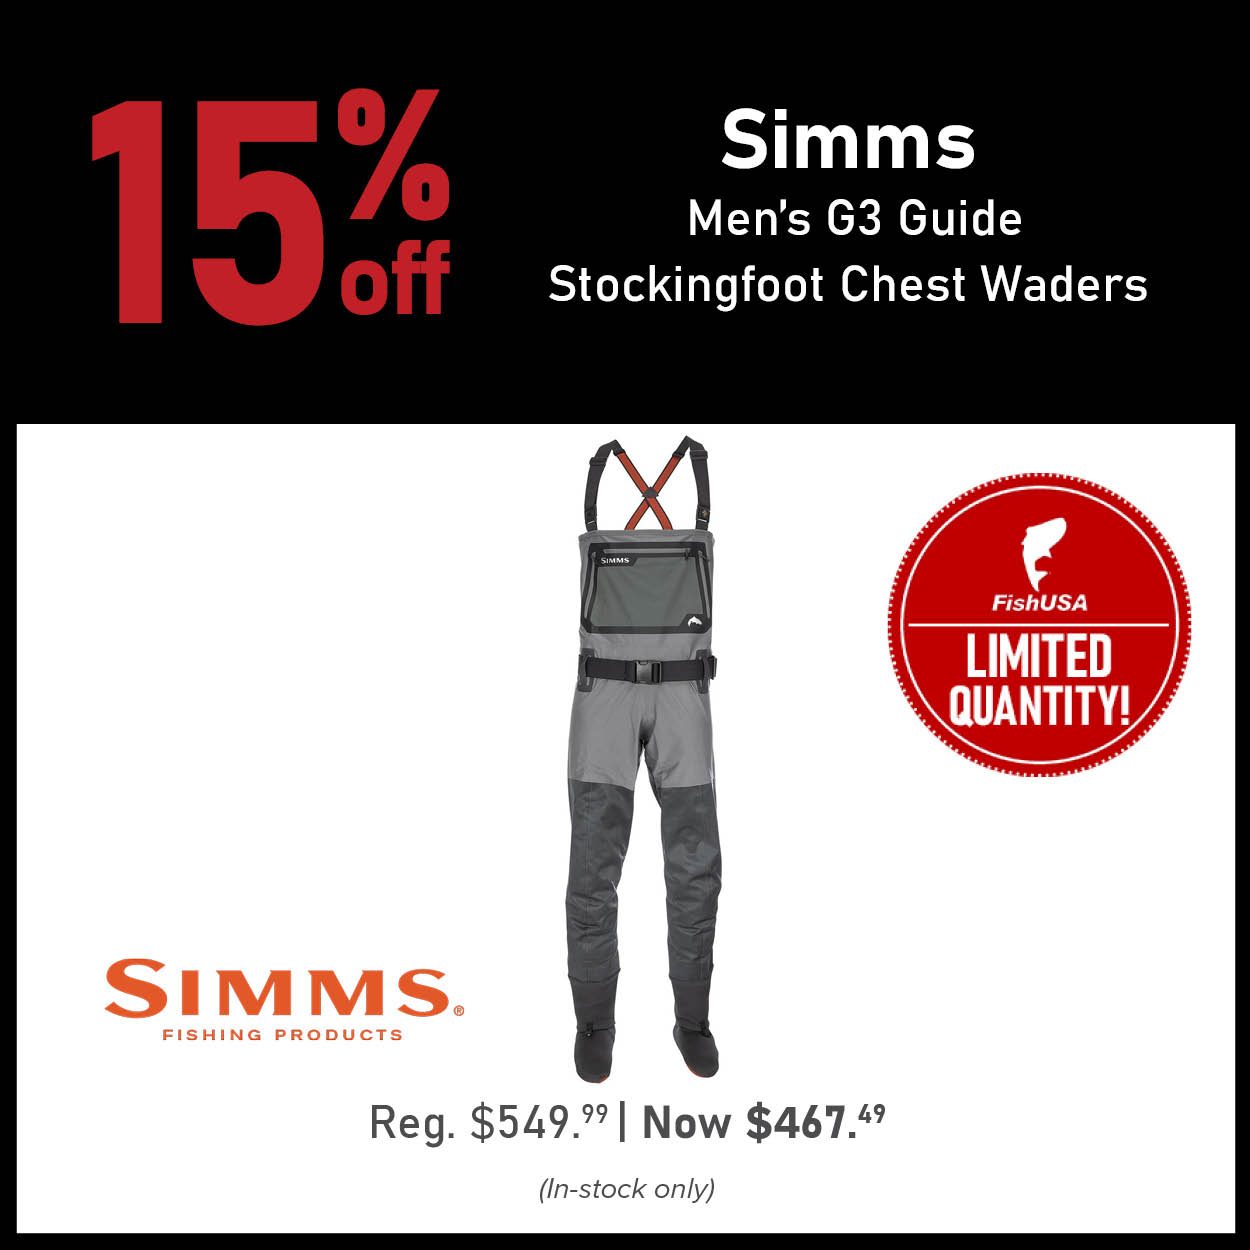 15% Limited Quantities Simms Men's G3 Guide Stockingfoot Chest Waders Reg. $549.99 | Now $467.49 (In-stock only)